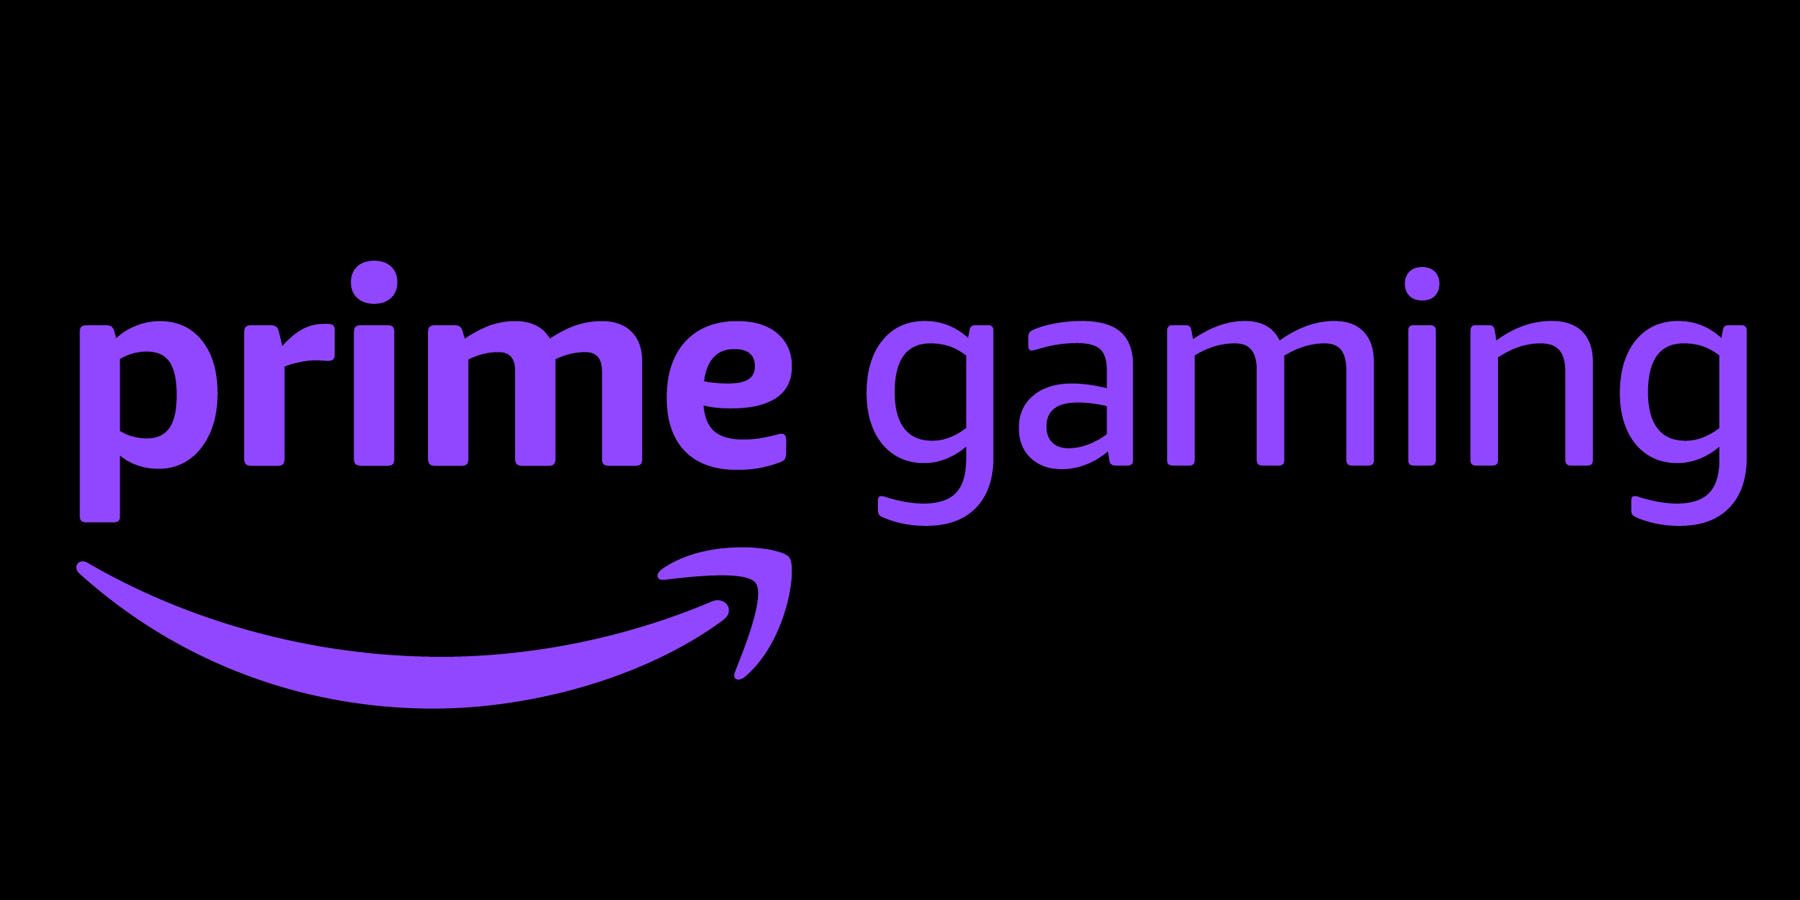 A purple Amazon Prime Gaming logo against a black background.